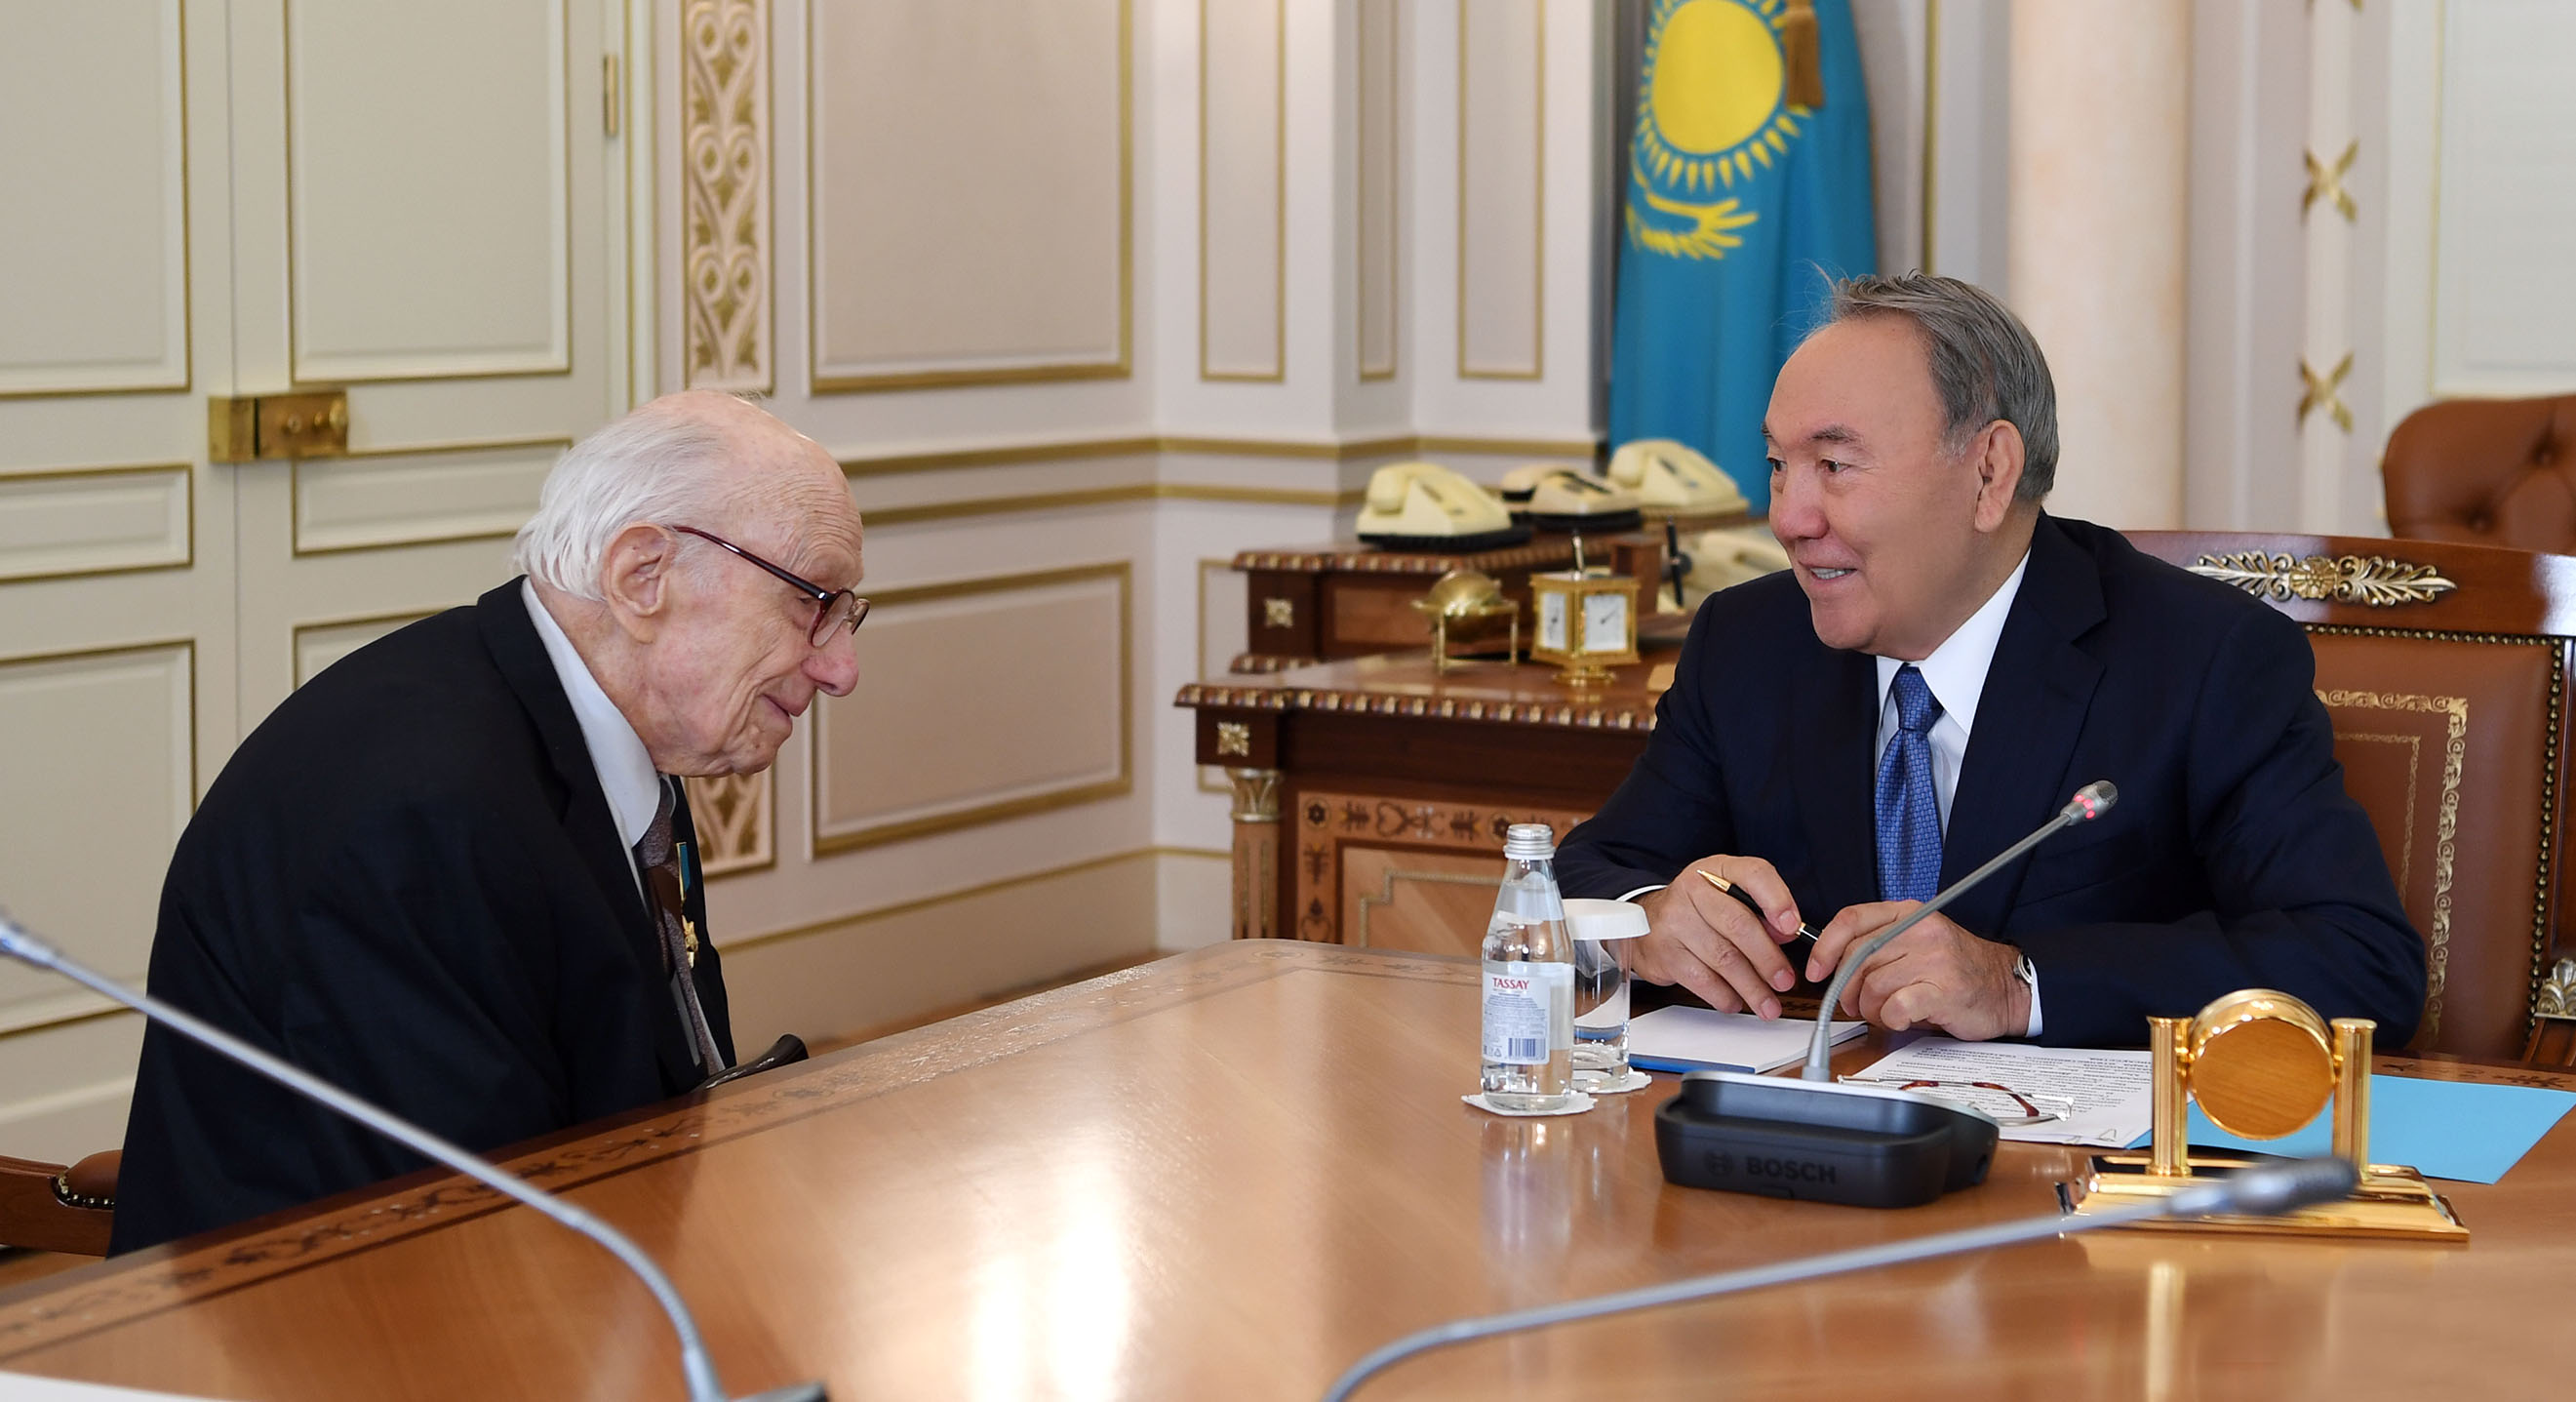 The Head of State holds a meeting with People's Artist of Kazakhstan, Yuri Pomerantsev